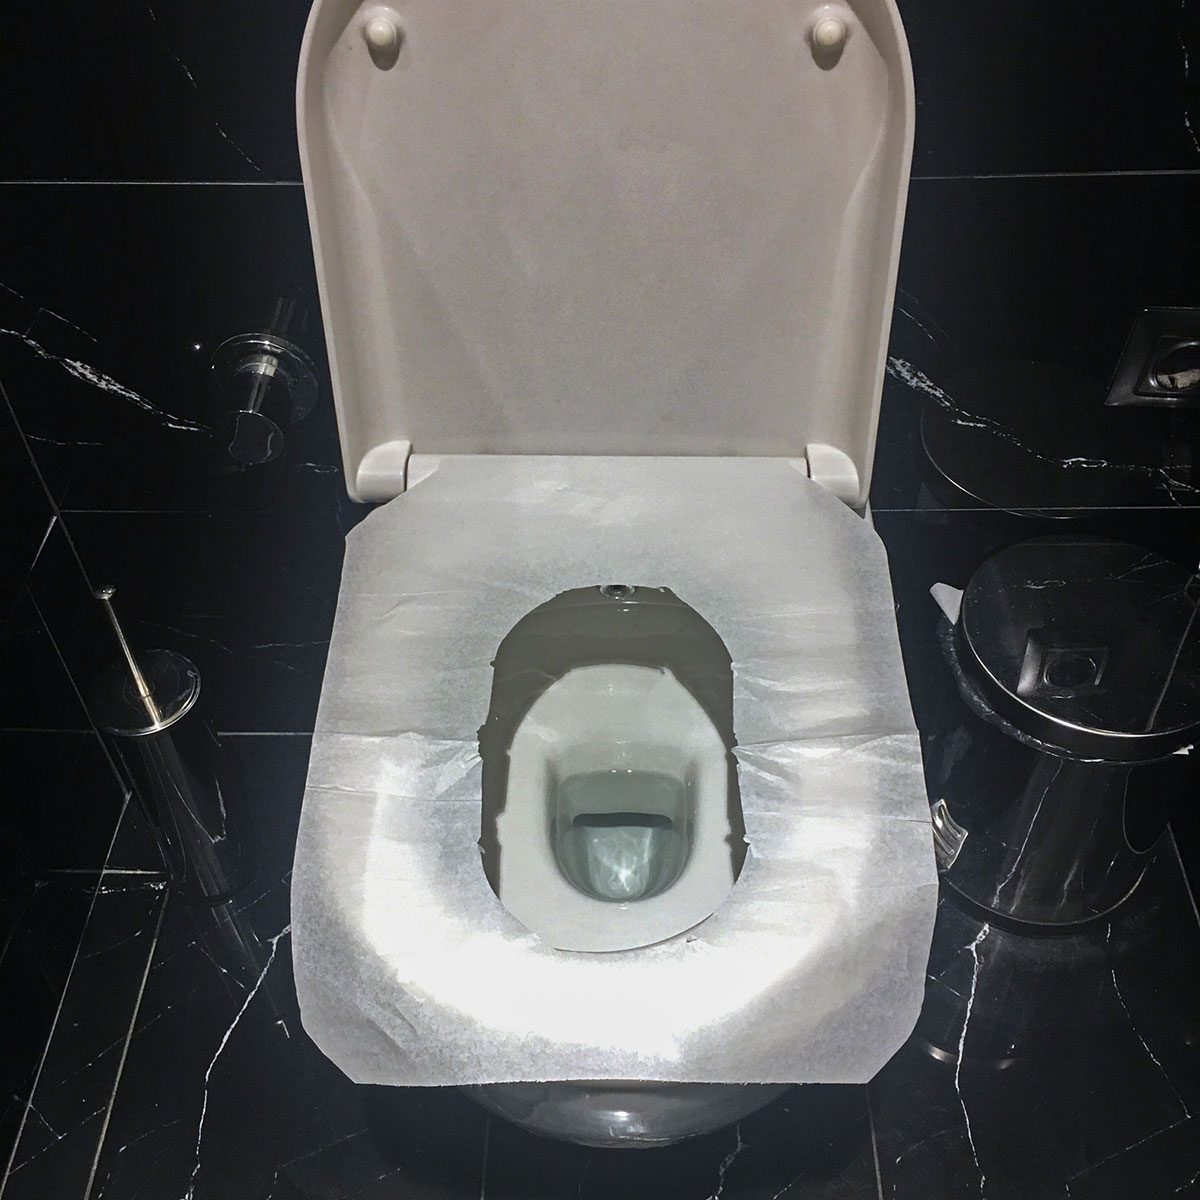 How to Use a Toilet Seat Cover the Right Way (You're Doing It Wrong)